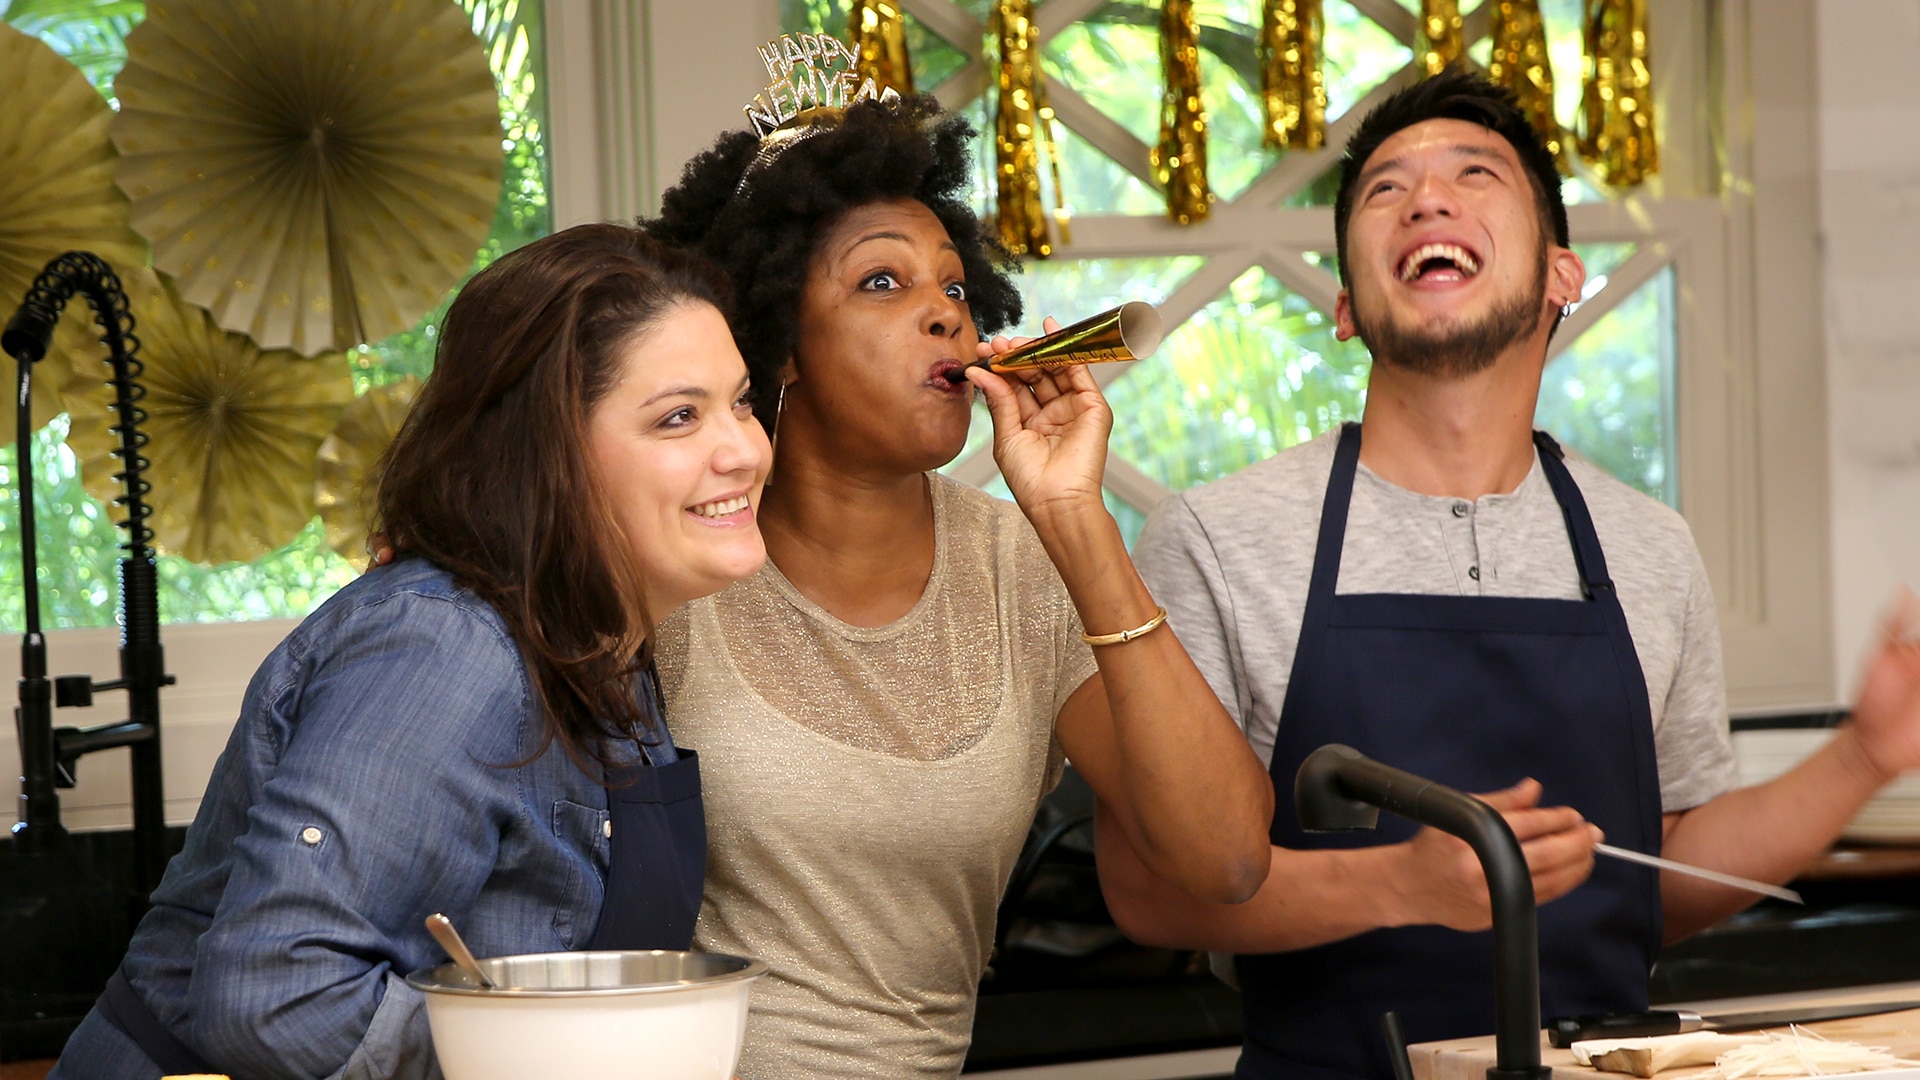 Top Chef Season 18 Alums Compete to Make Quick & Tasty New Year's Day Brunch Dishes